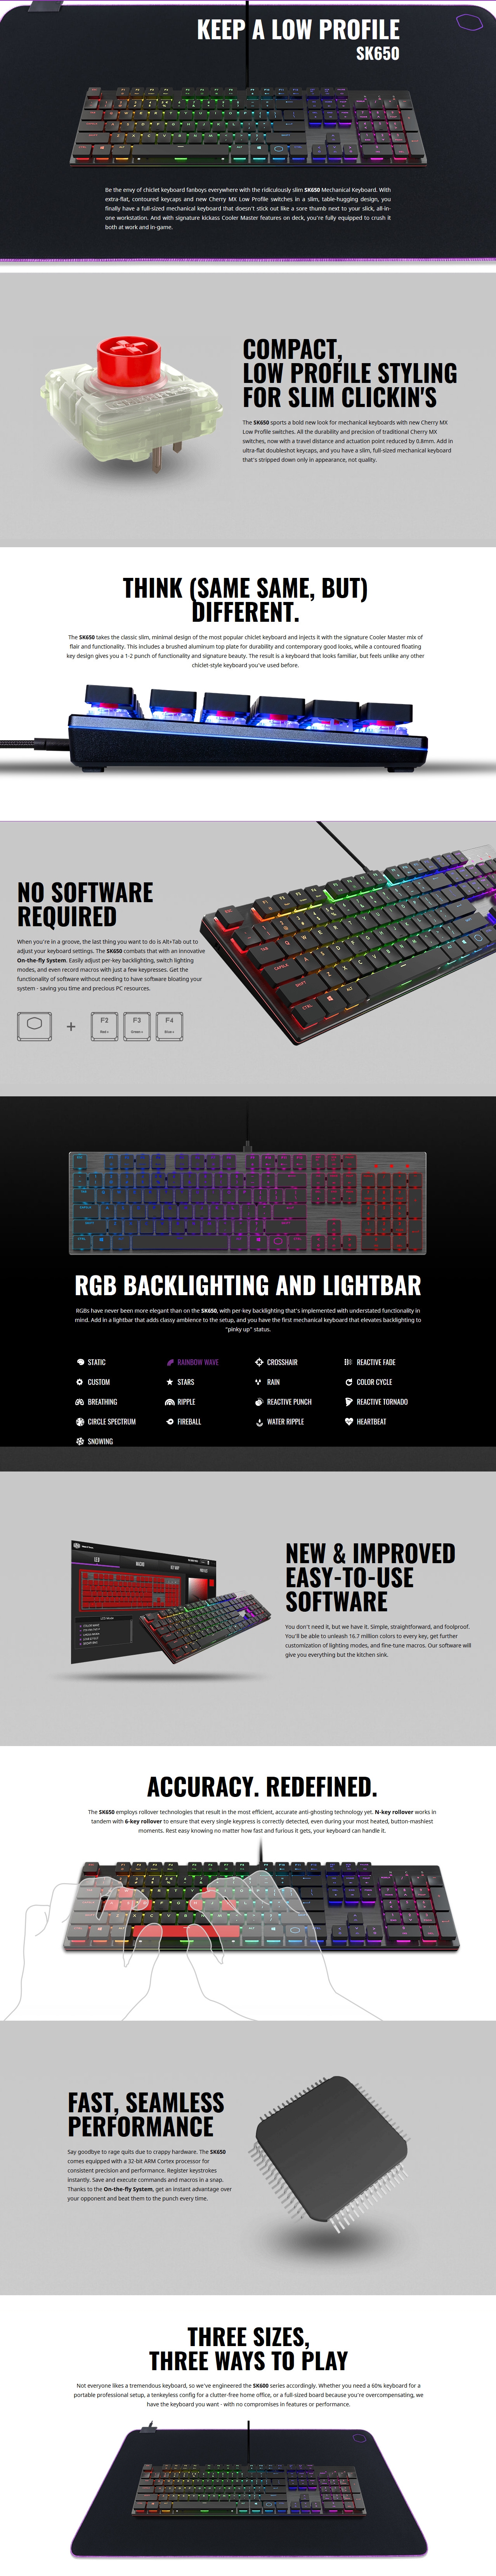 A large marketing image providing additional information about the product Cooler Master MasterKeys SK650 RGB Mechanical Keyboard (MX Low Profile Red)  - Additional alt info not provided